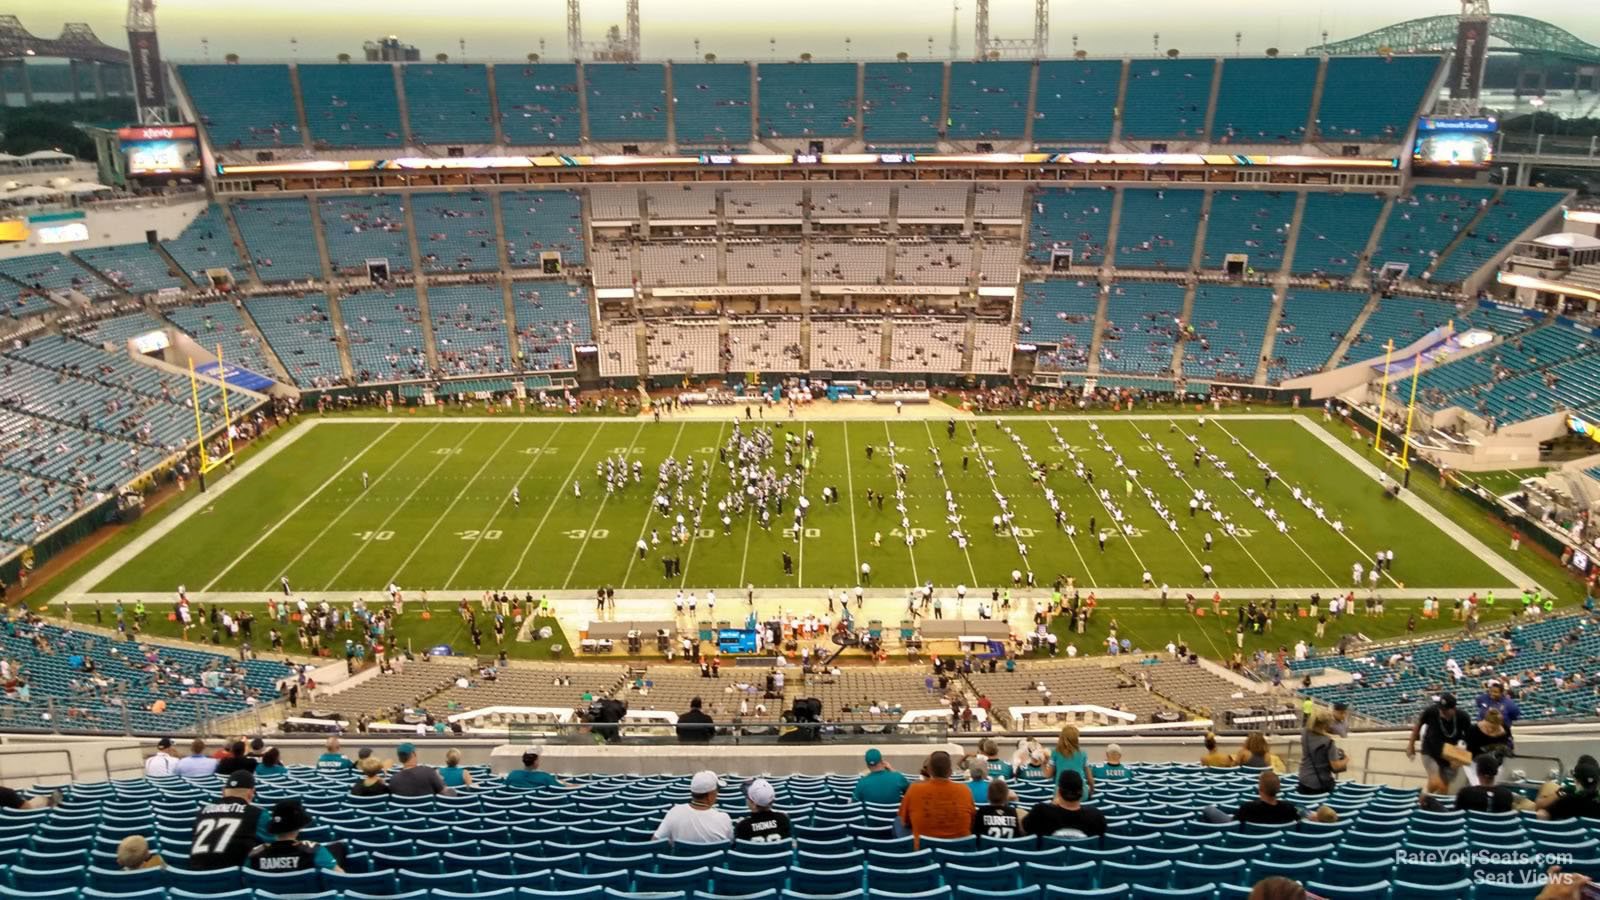 section 410, row bb seat view  - tiaa bank field